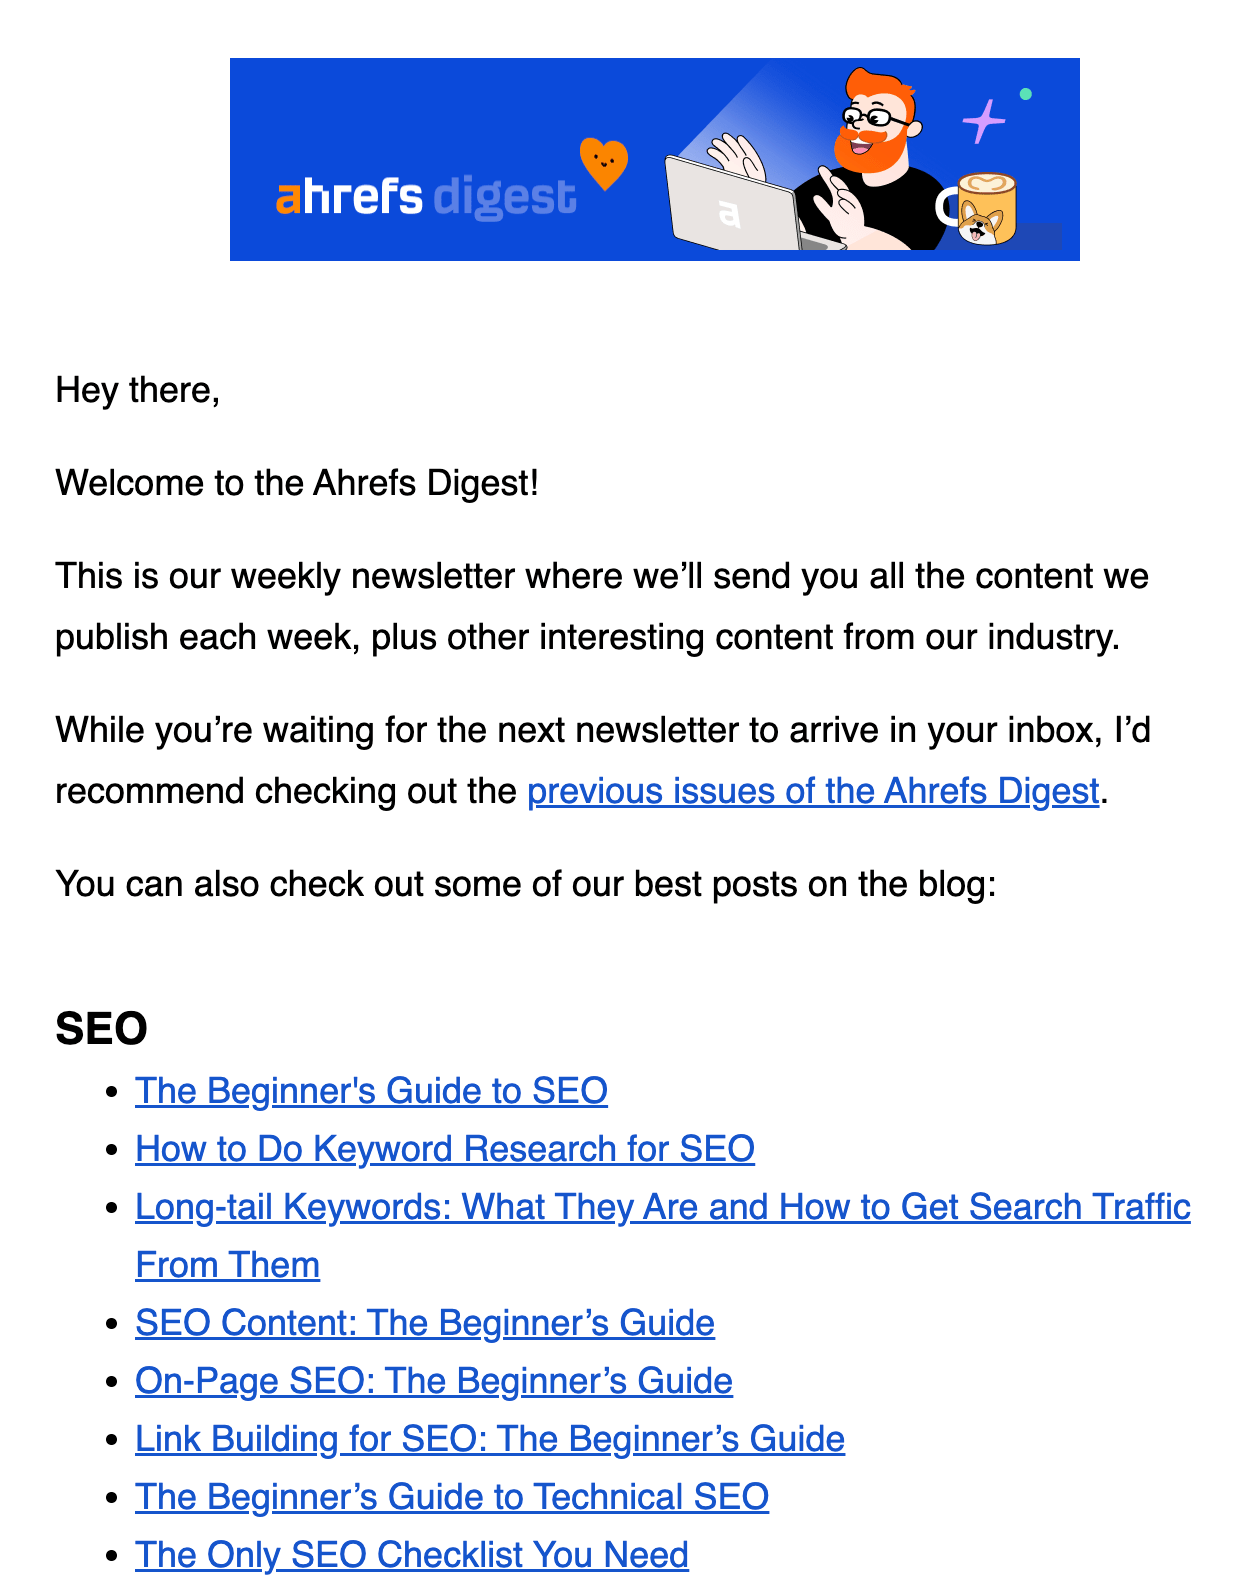 Ahrefs' welcome email